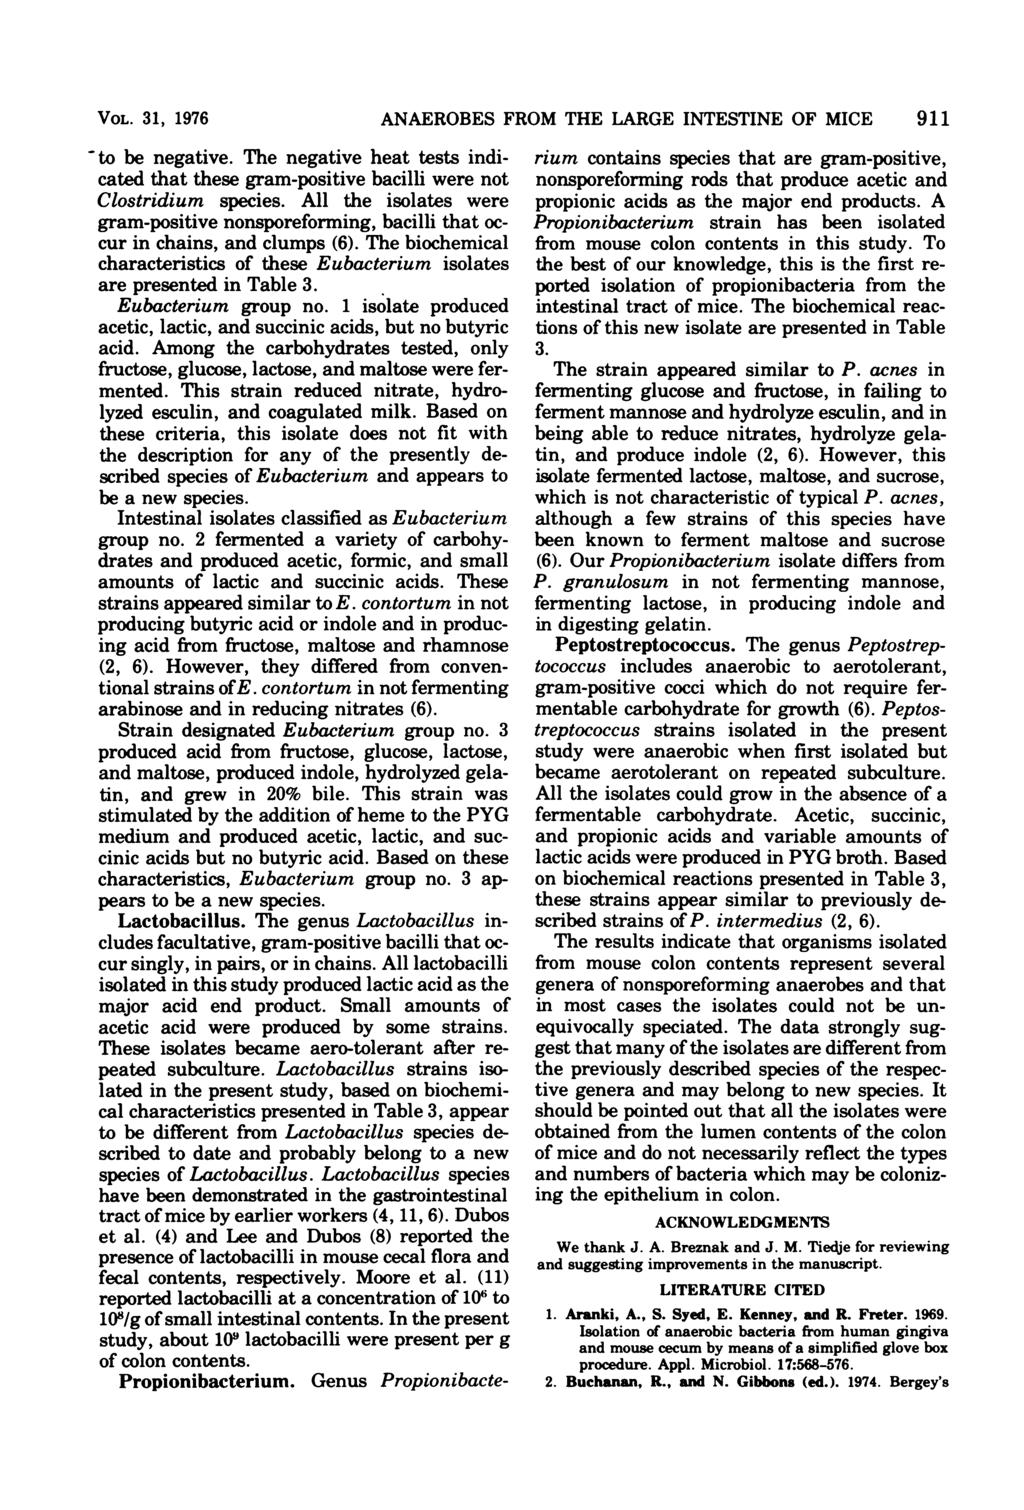 VOL. 31, 1976 ANAEROBES FROM THE LARGE INTESTINE OF MICE 911 -to be negative. The negative heat tests indicated that these gram-positive bacilli were not Clostridium species.